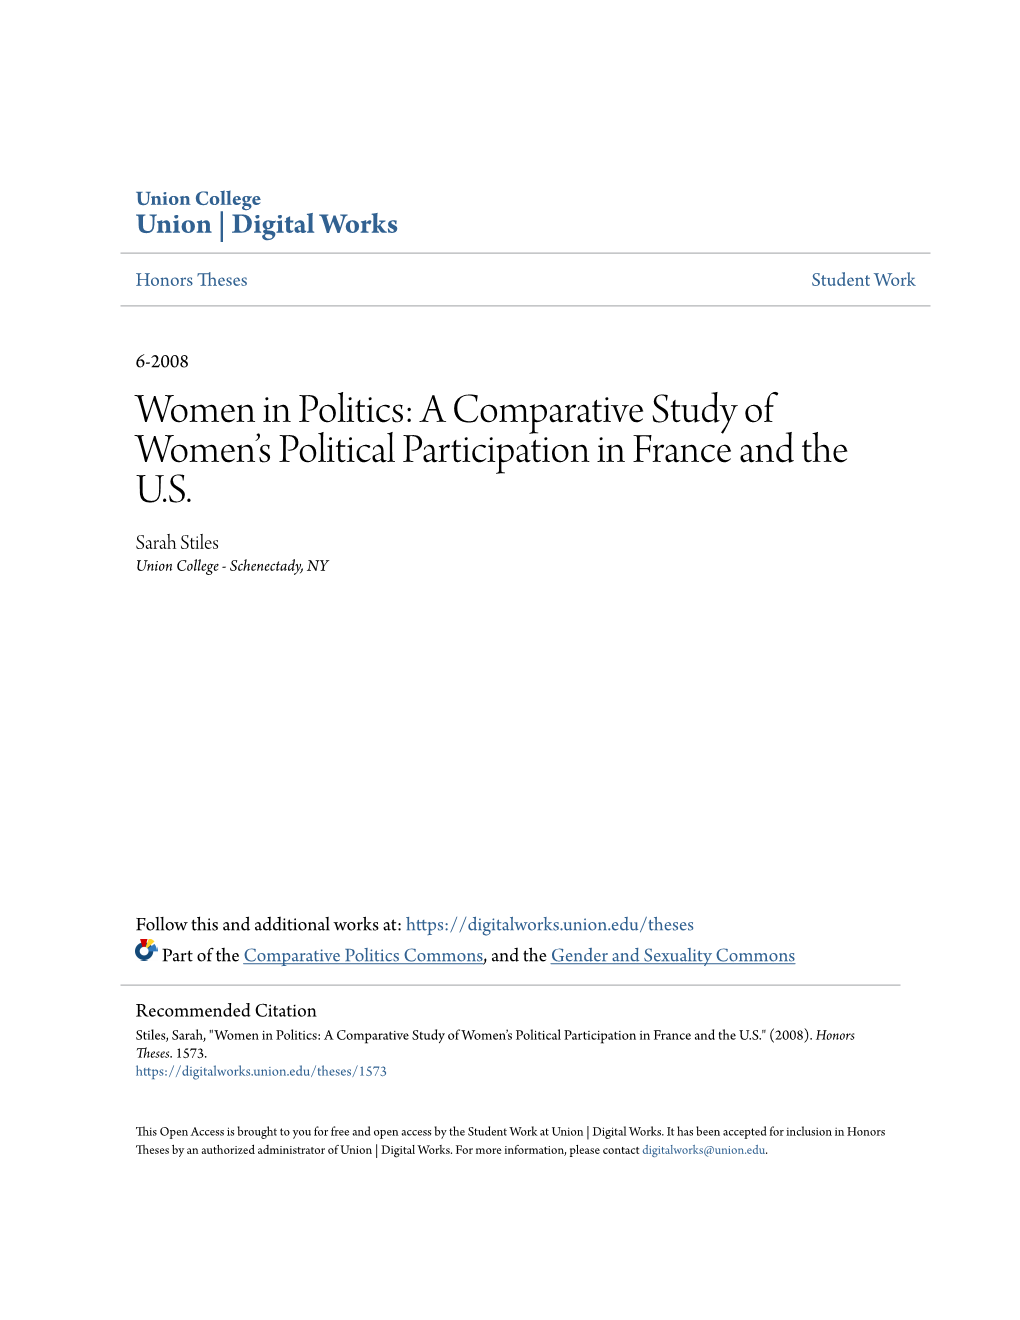 Women in Politics: a Comparative Study of Women’S Political Participation in France and the U.S